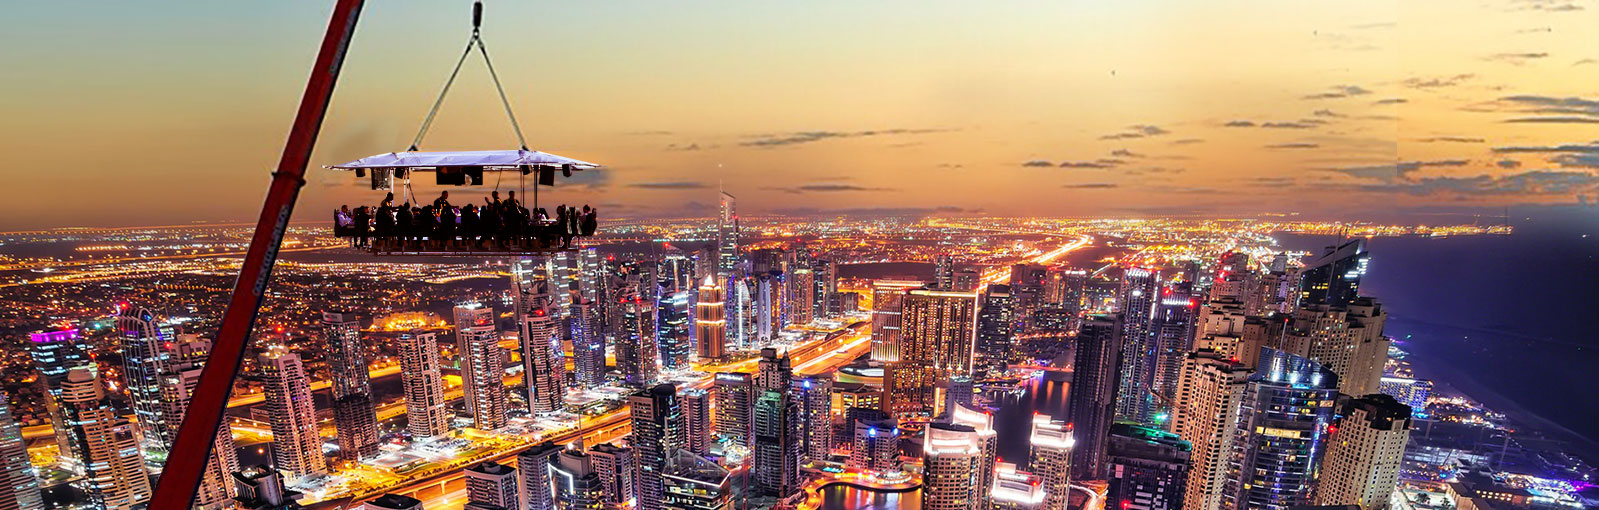 15 of the best things to do in Dubai